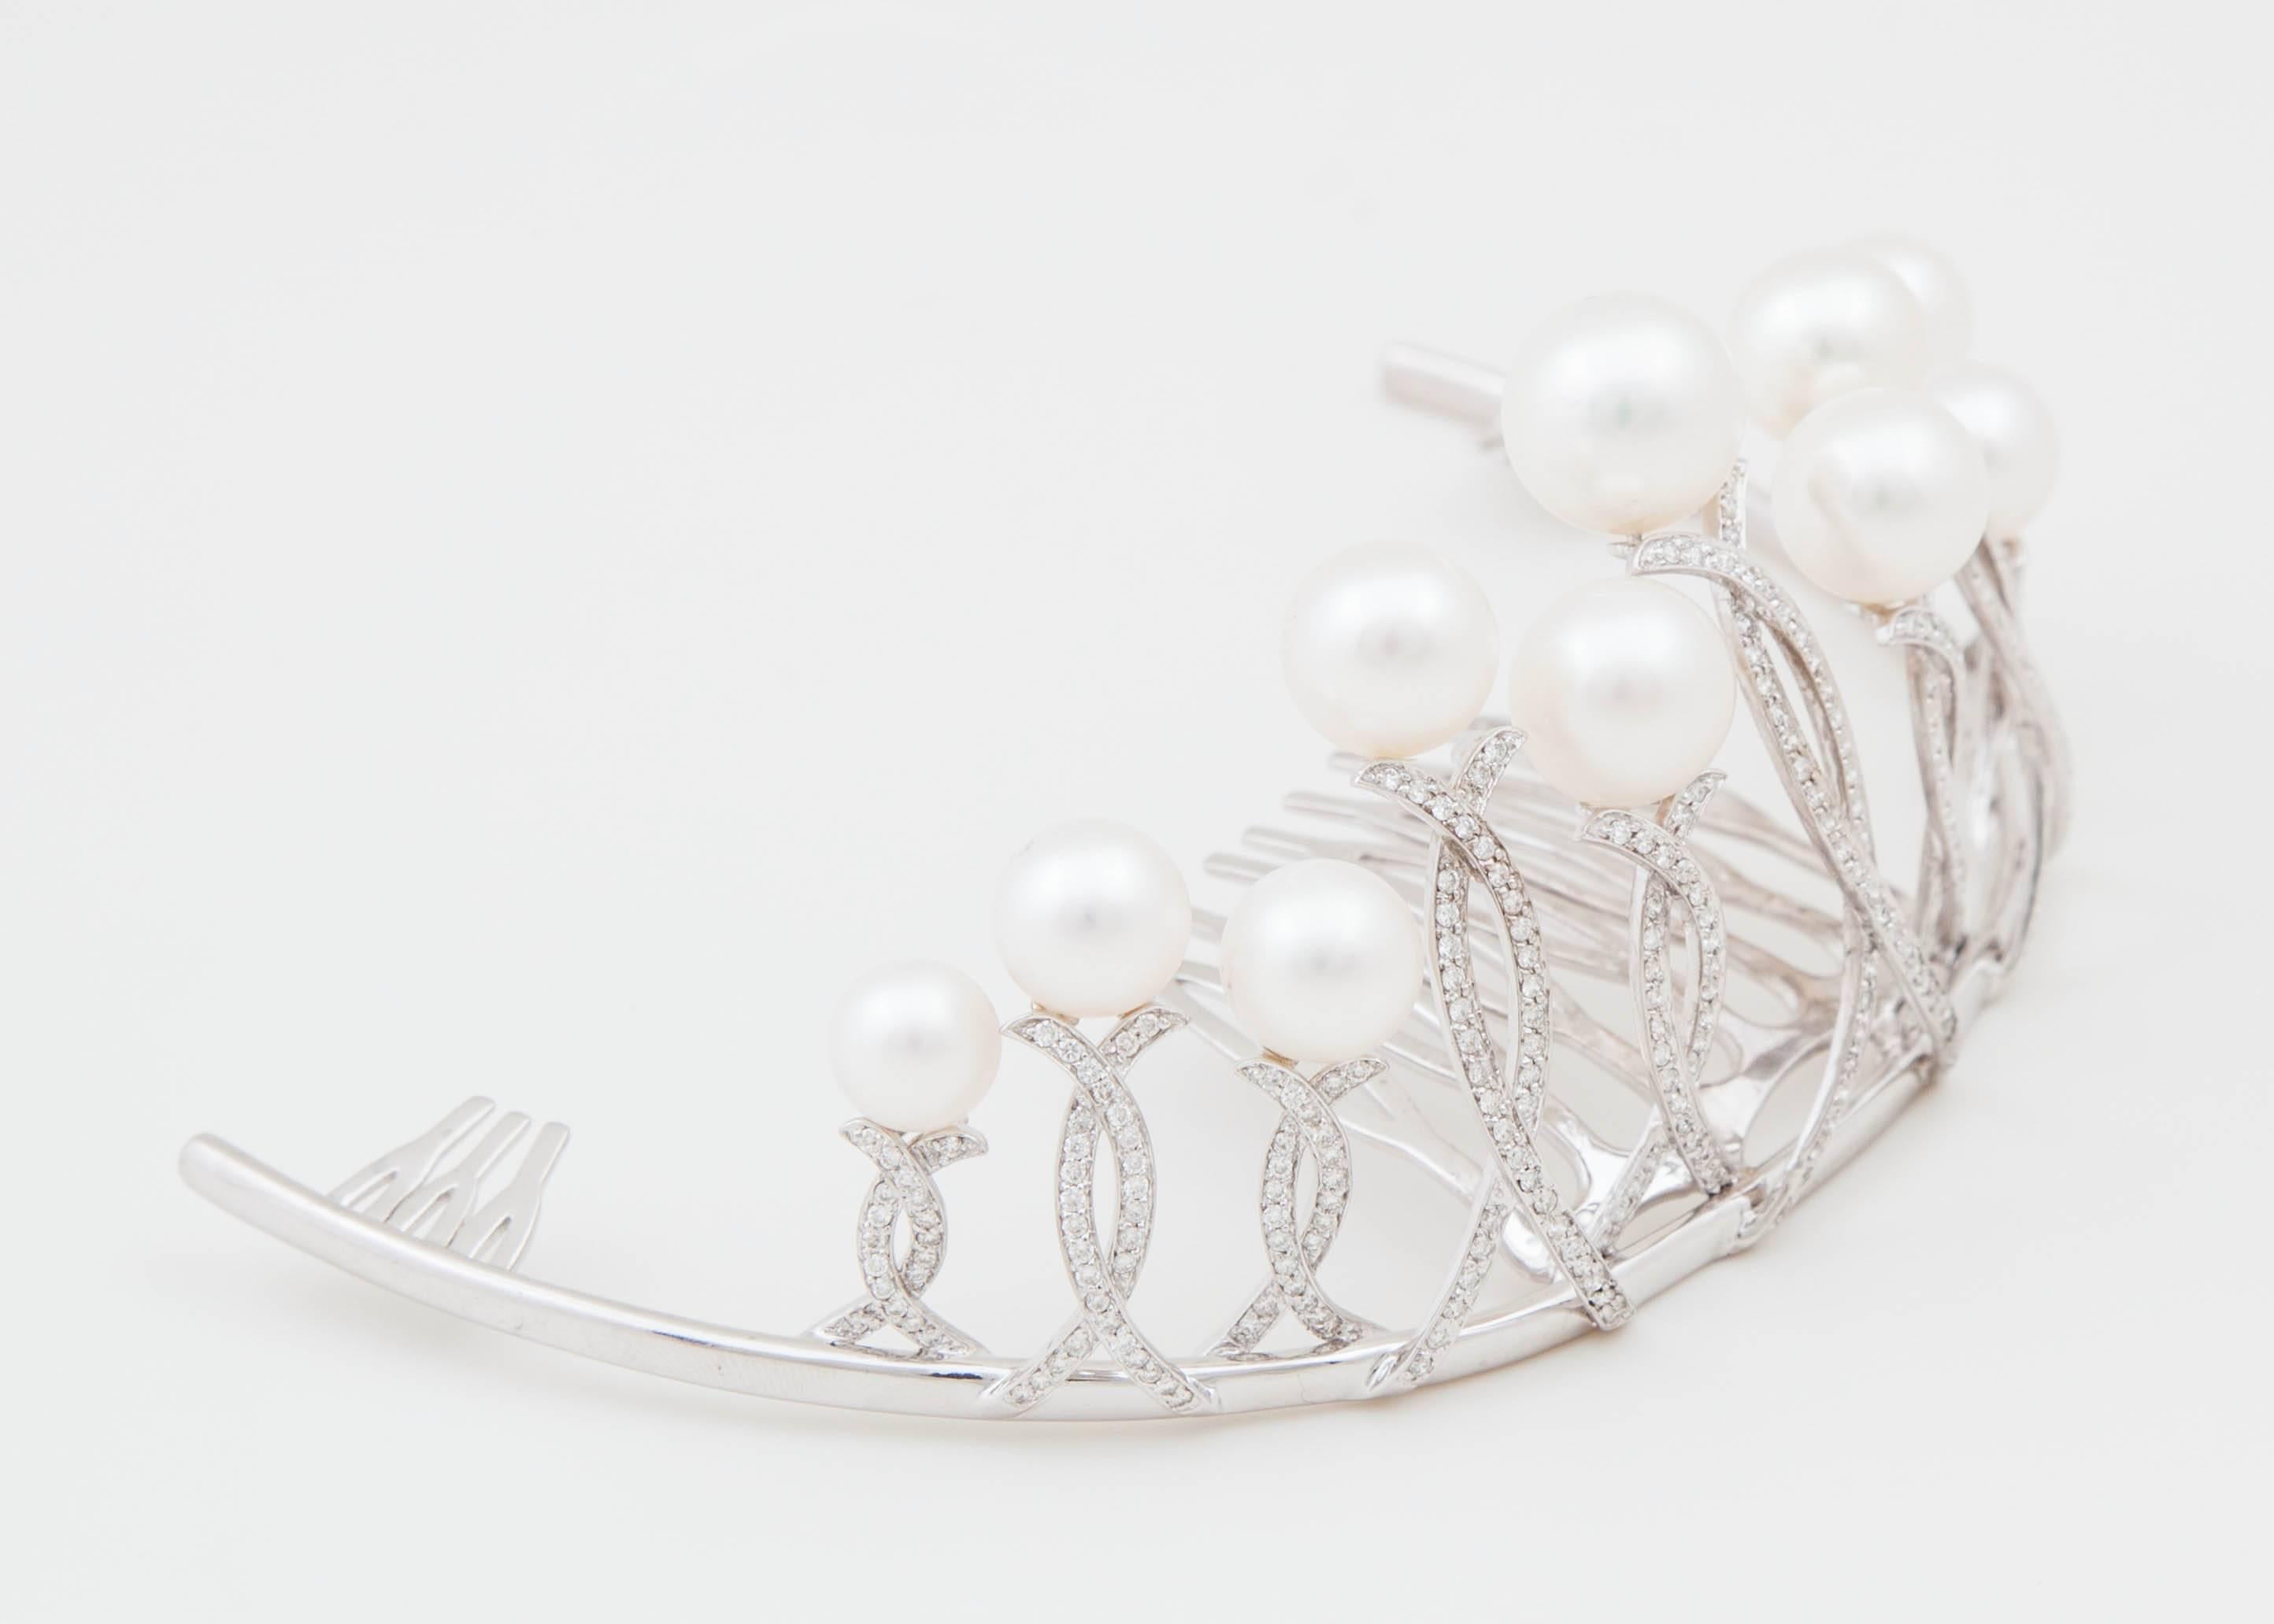 This natural color White South Sea cultured tiara is a must have to finish off a bridal or evening gown. The one of a kind tiara consists of 11 White South Sea pearls ranging in size from 8mm-12mm. It is set in 18k white gold with 2.3 carats of